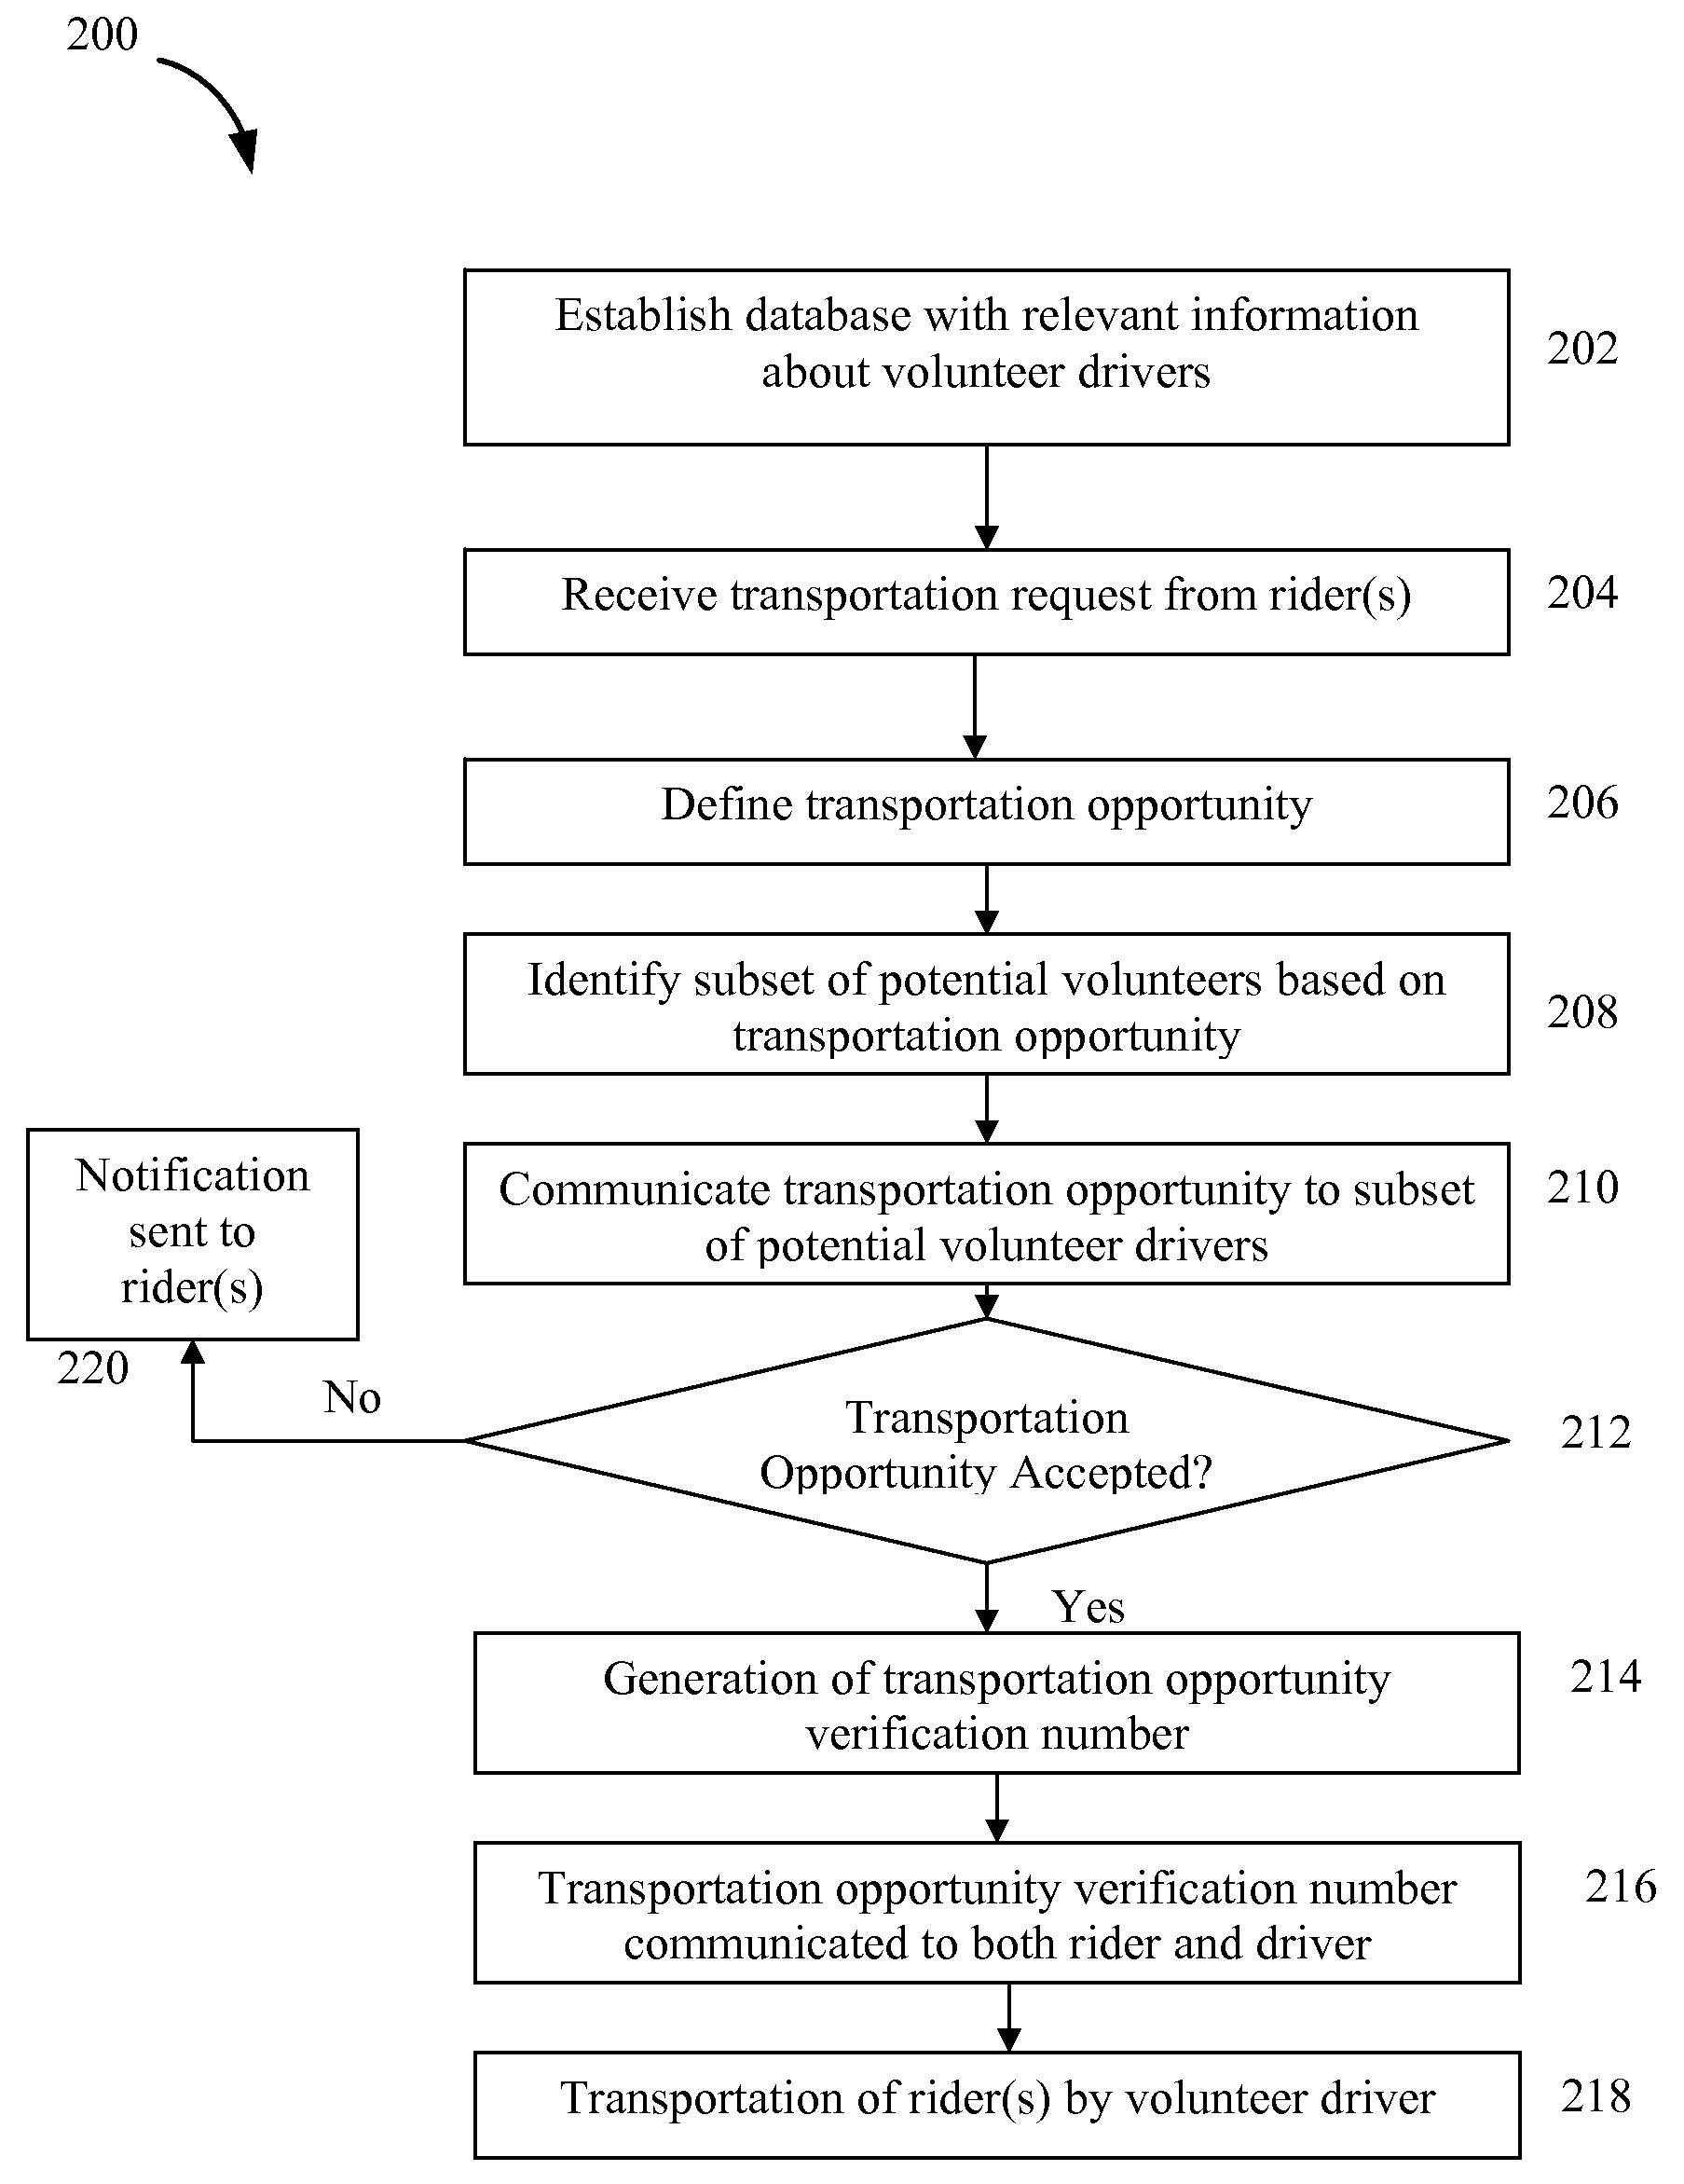 Systems and Methods for Coordinating Transportation Between Riders and Volunteer Drivers